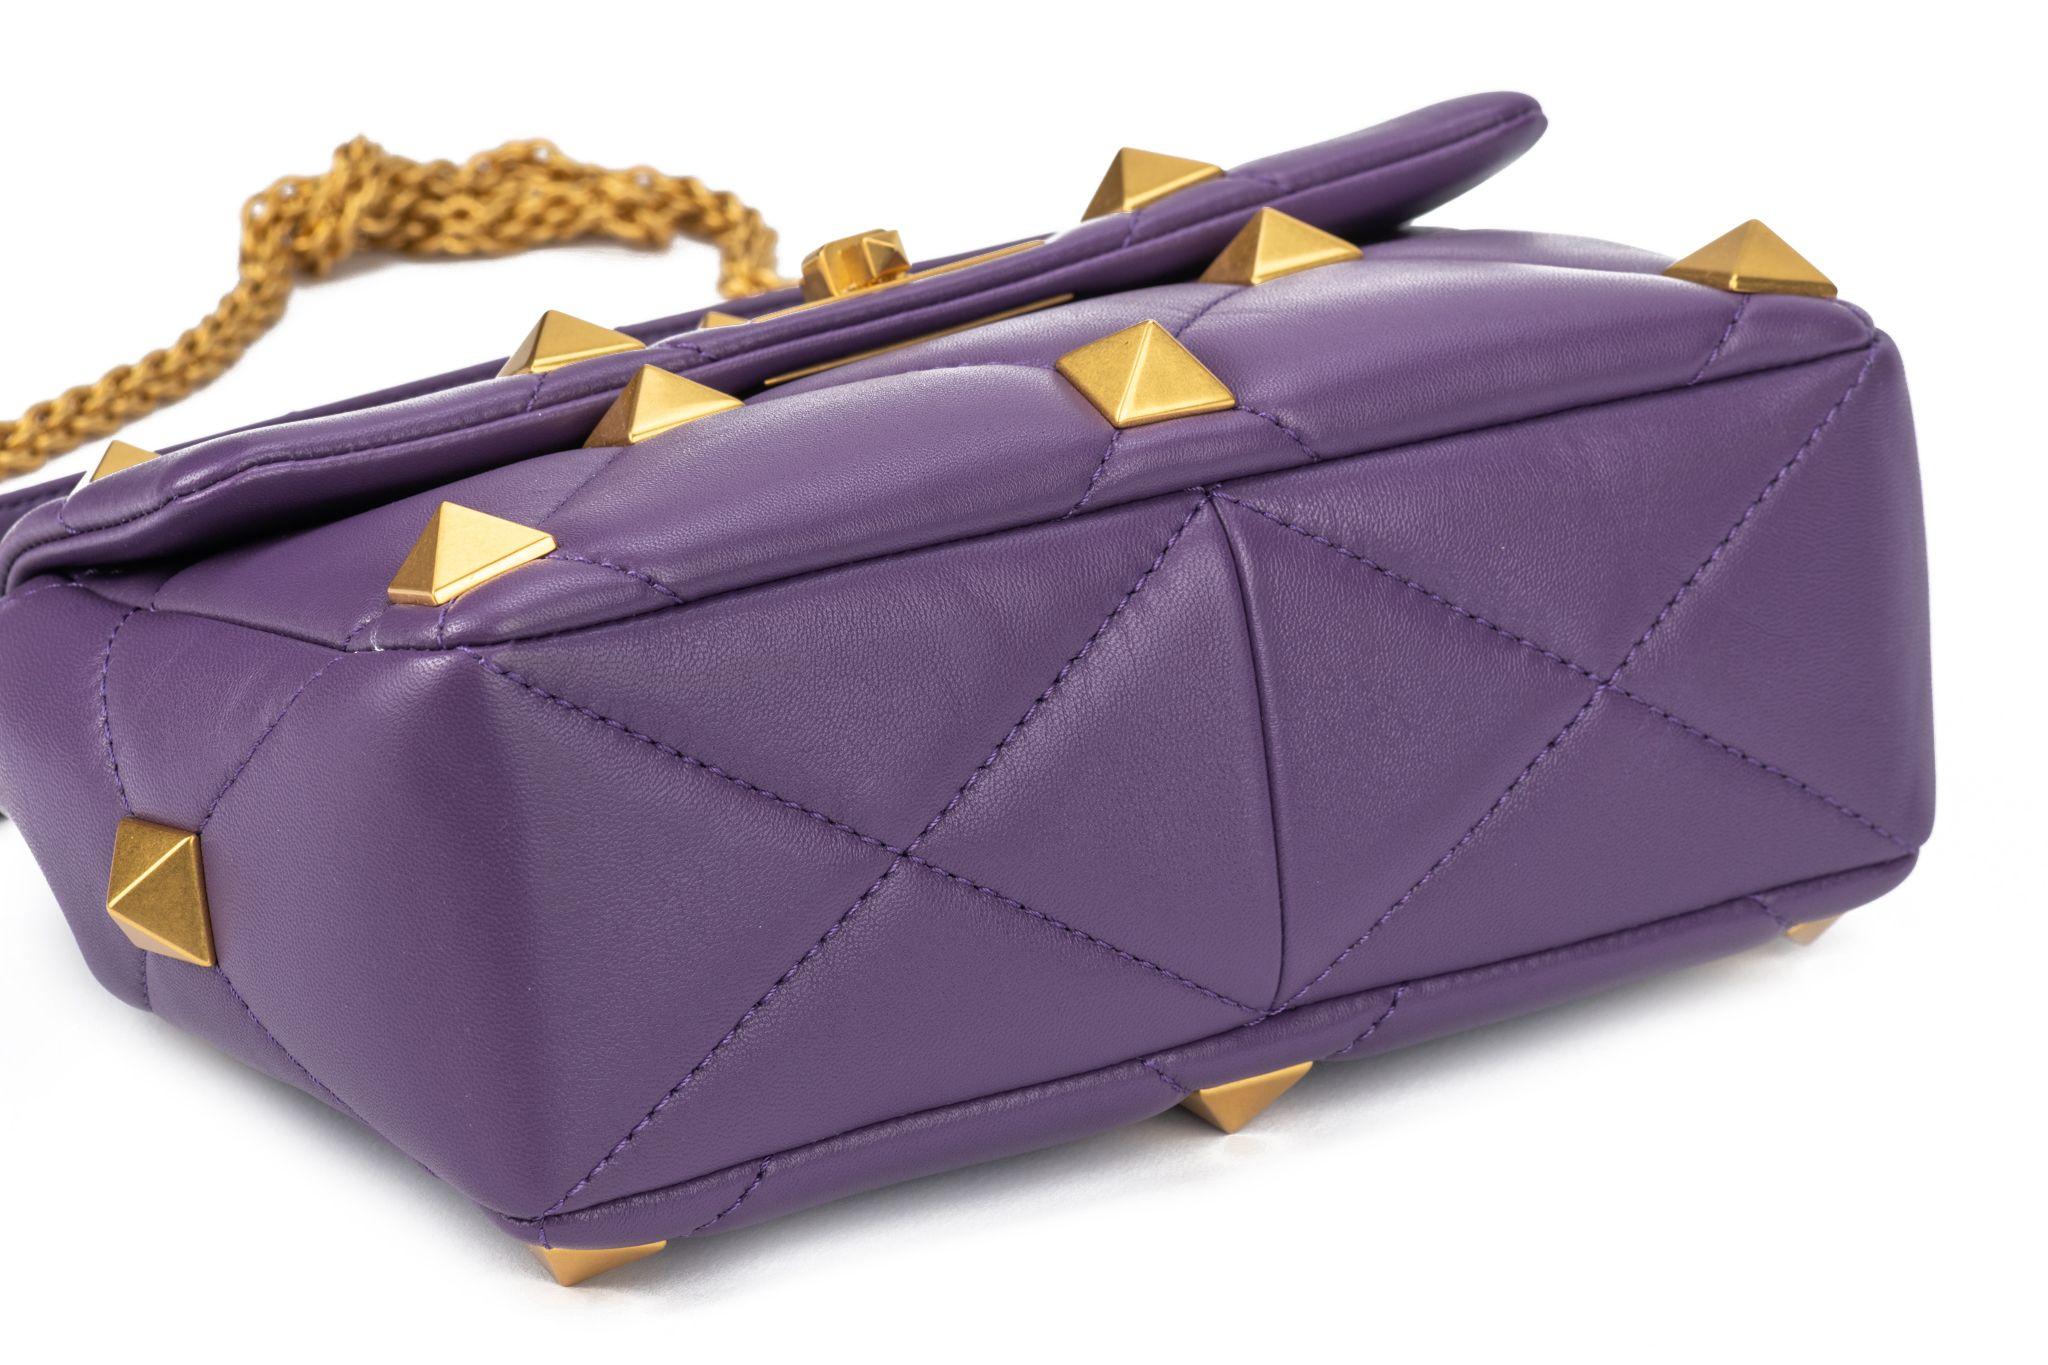 Valentino Roman Stud Collection in lavender lambskin leather. Diamond-quilted shoulder bag with tonal studs and a versatile top handle and cross body strap combination. Handle drop 3”, detachable shoulder strap 24”  The bag is new and comes with the